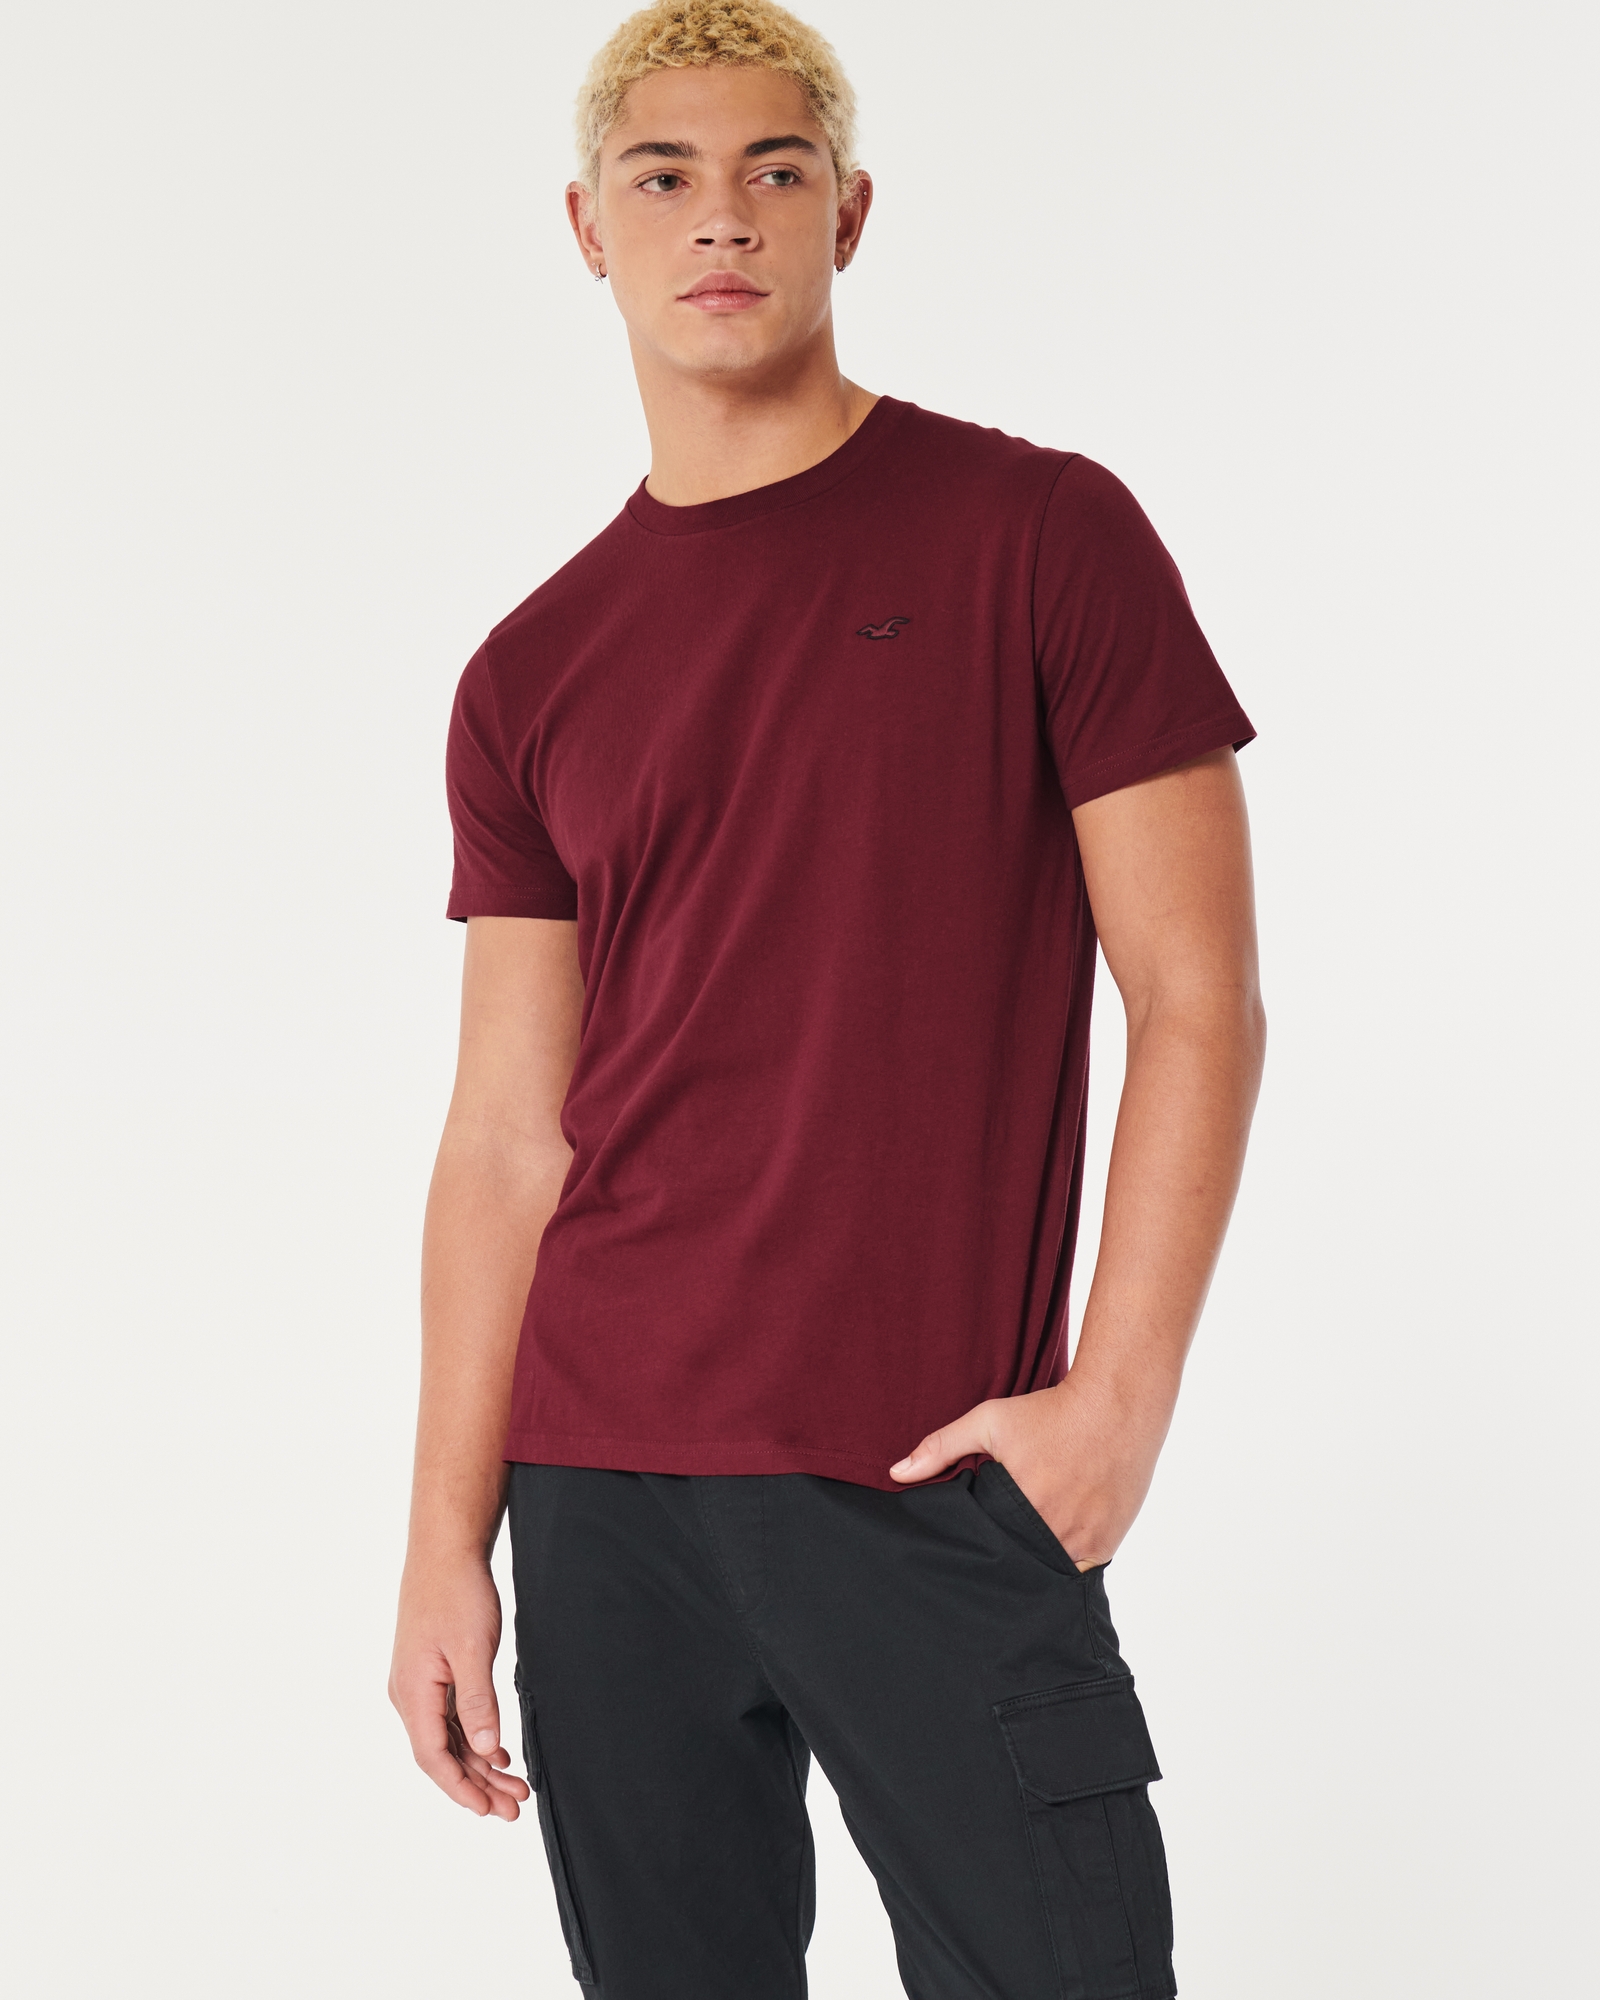 Hollister Icon Crew T-shirt 5-pack in Black for Men